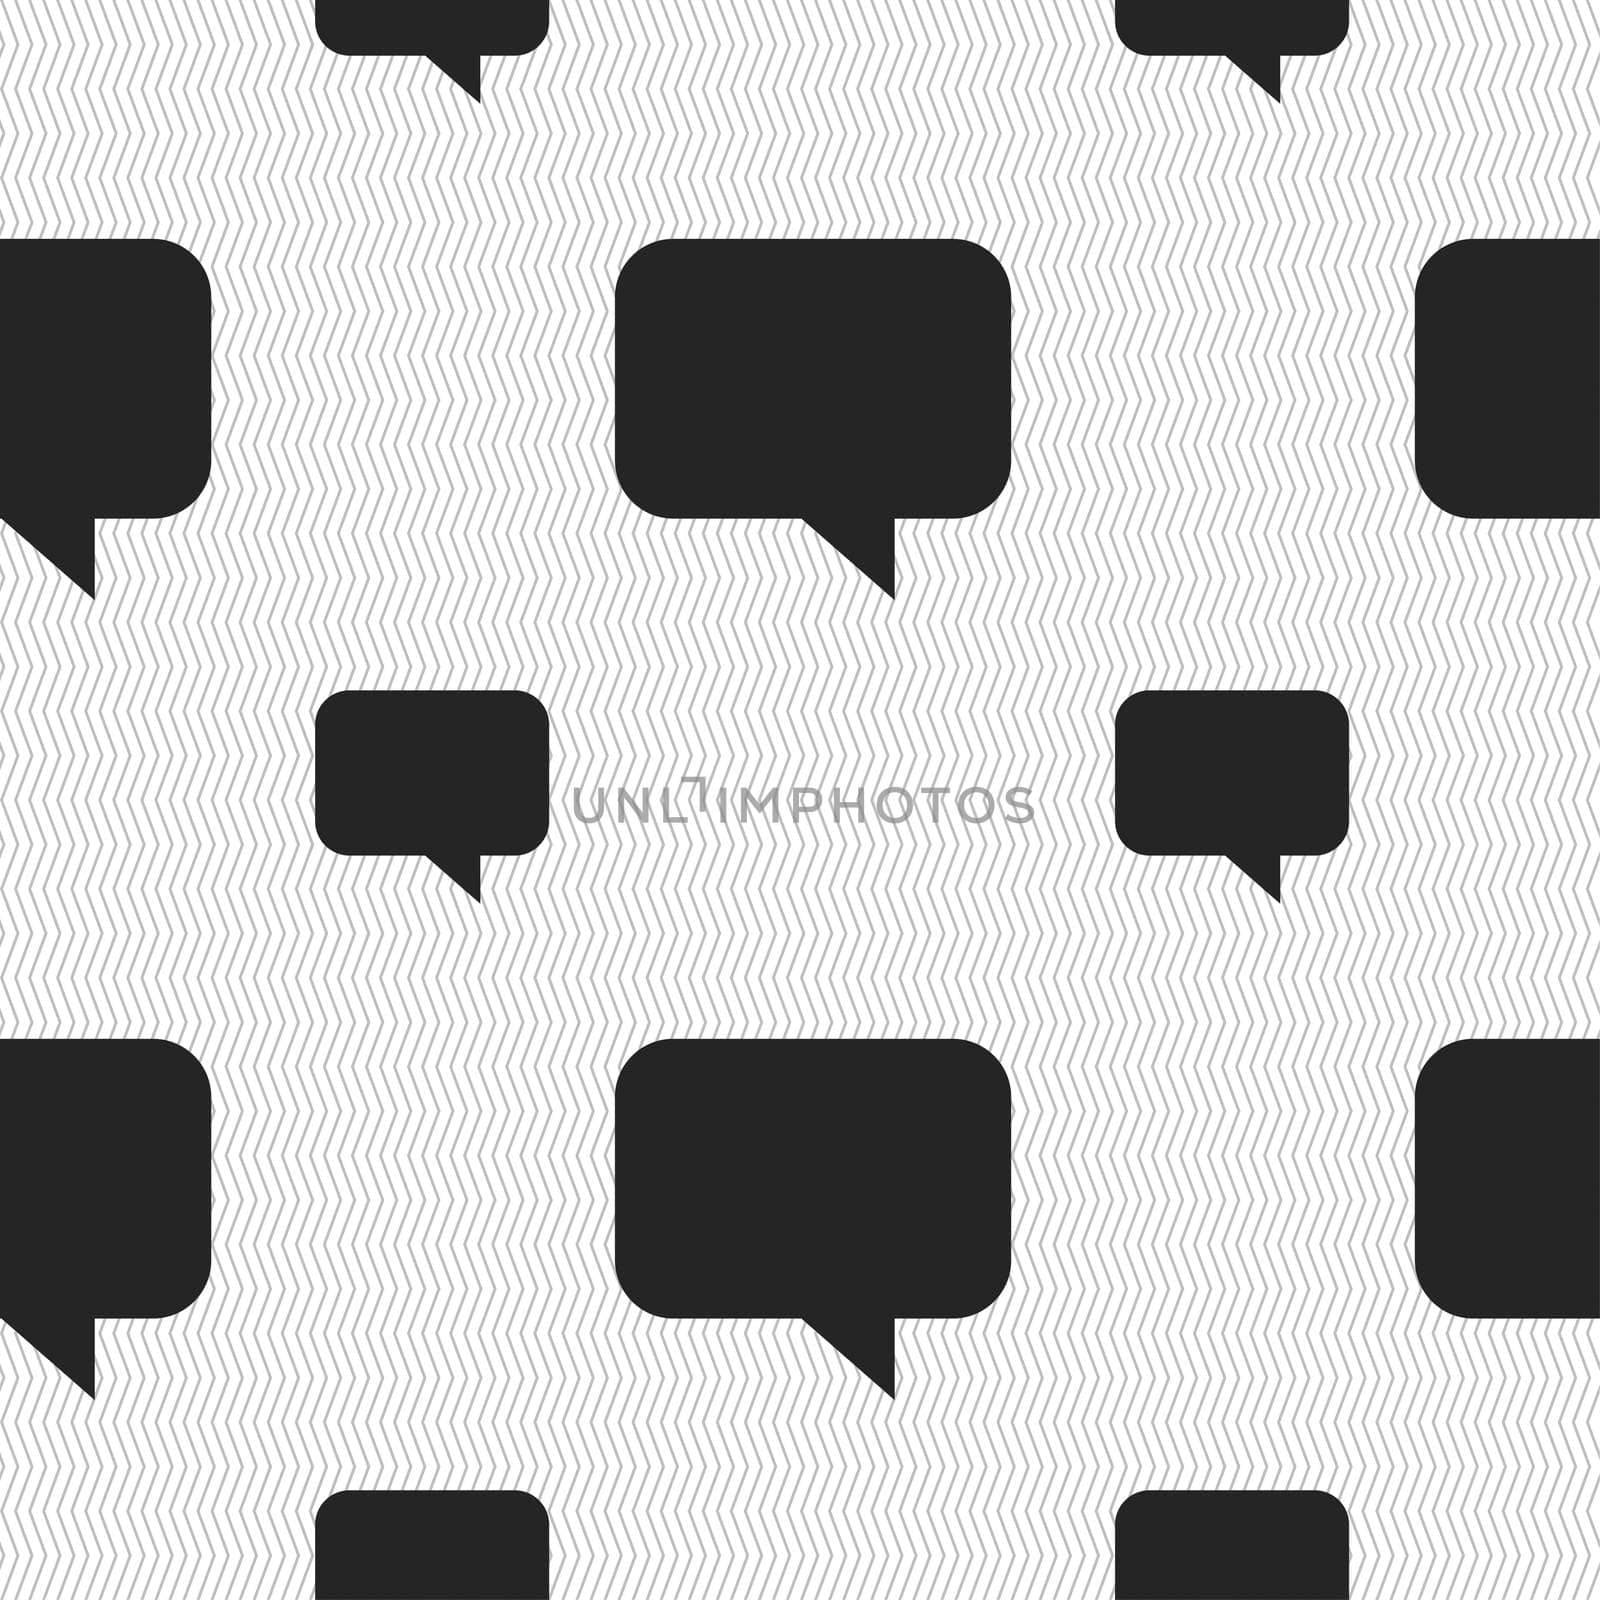 speech bubble, Chat think icon sign. Seamless pattern with geometric texture. illustration